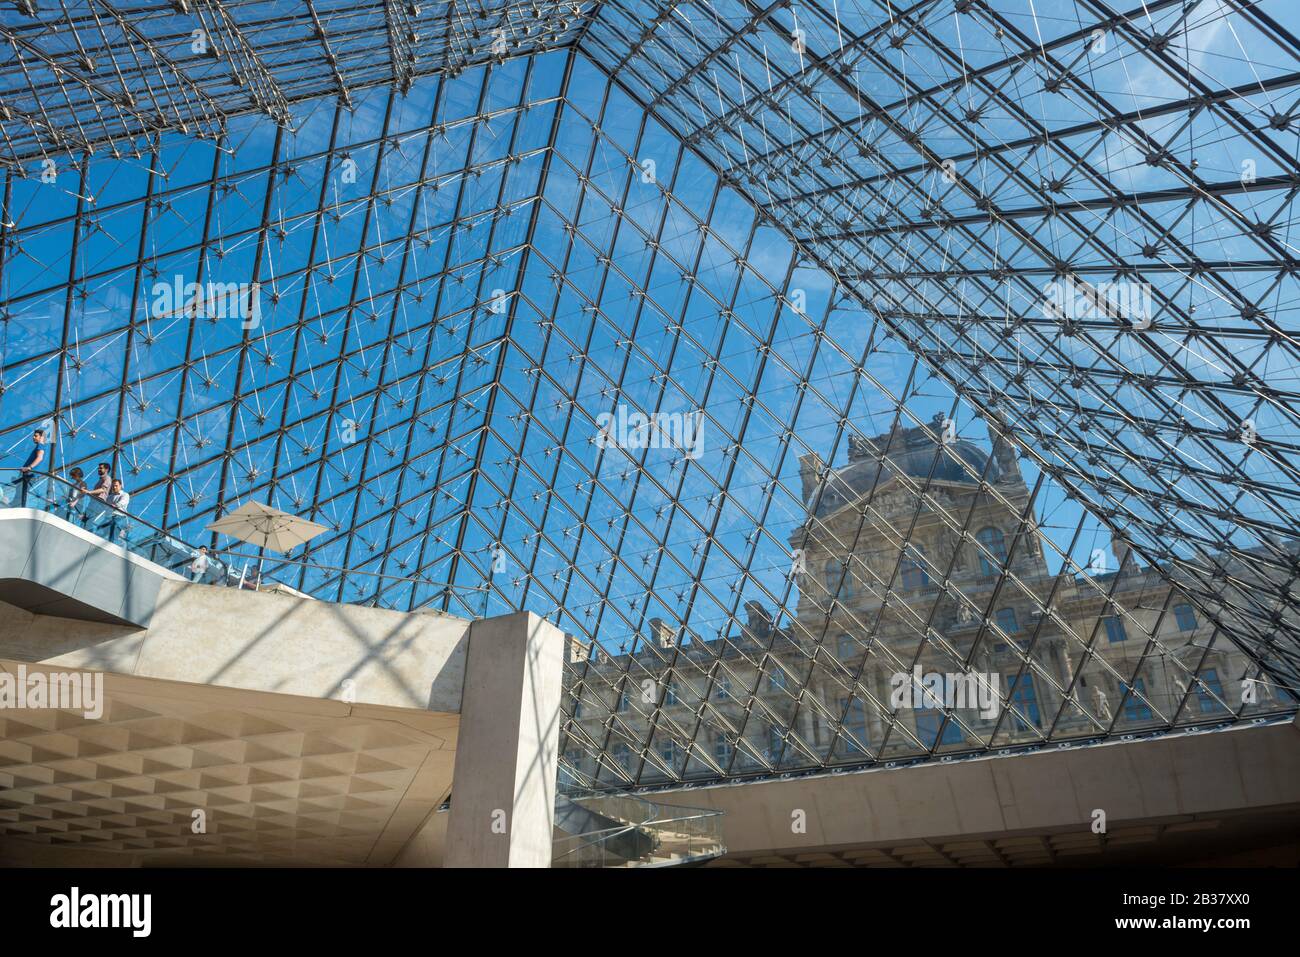 Interior view of the famous glass pyramid of the Louvre museum in Paris, France Stock Photo